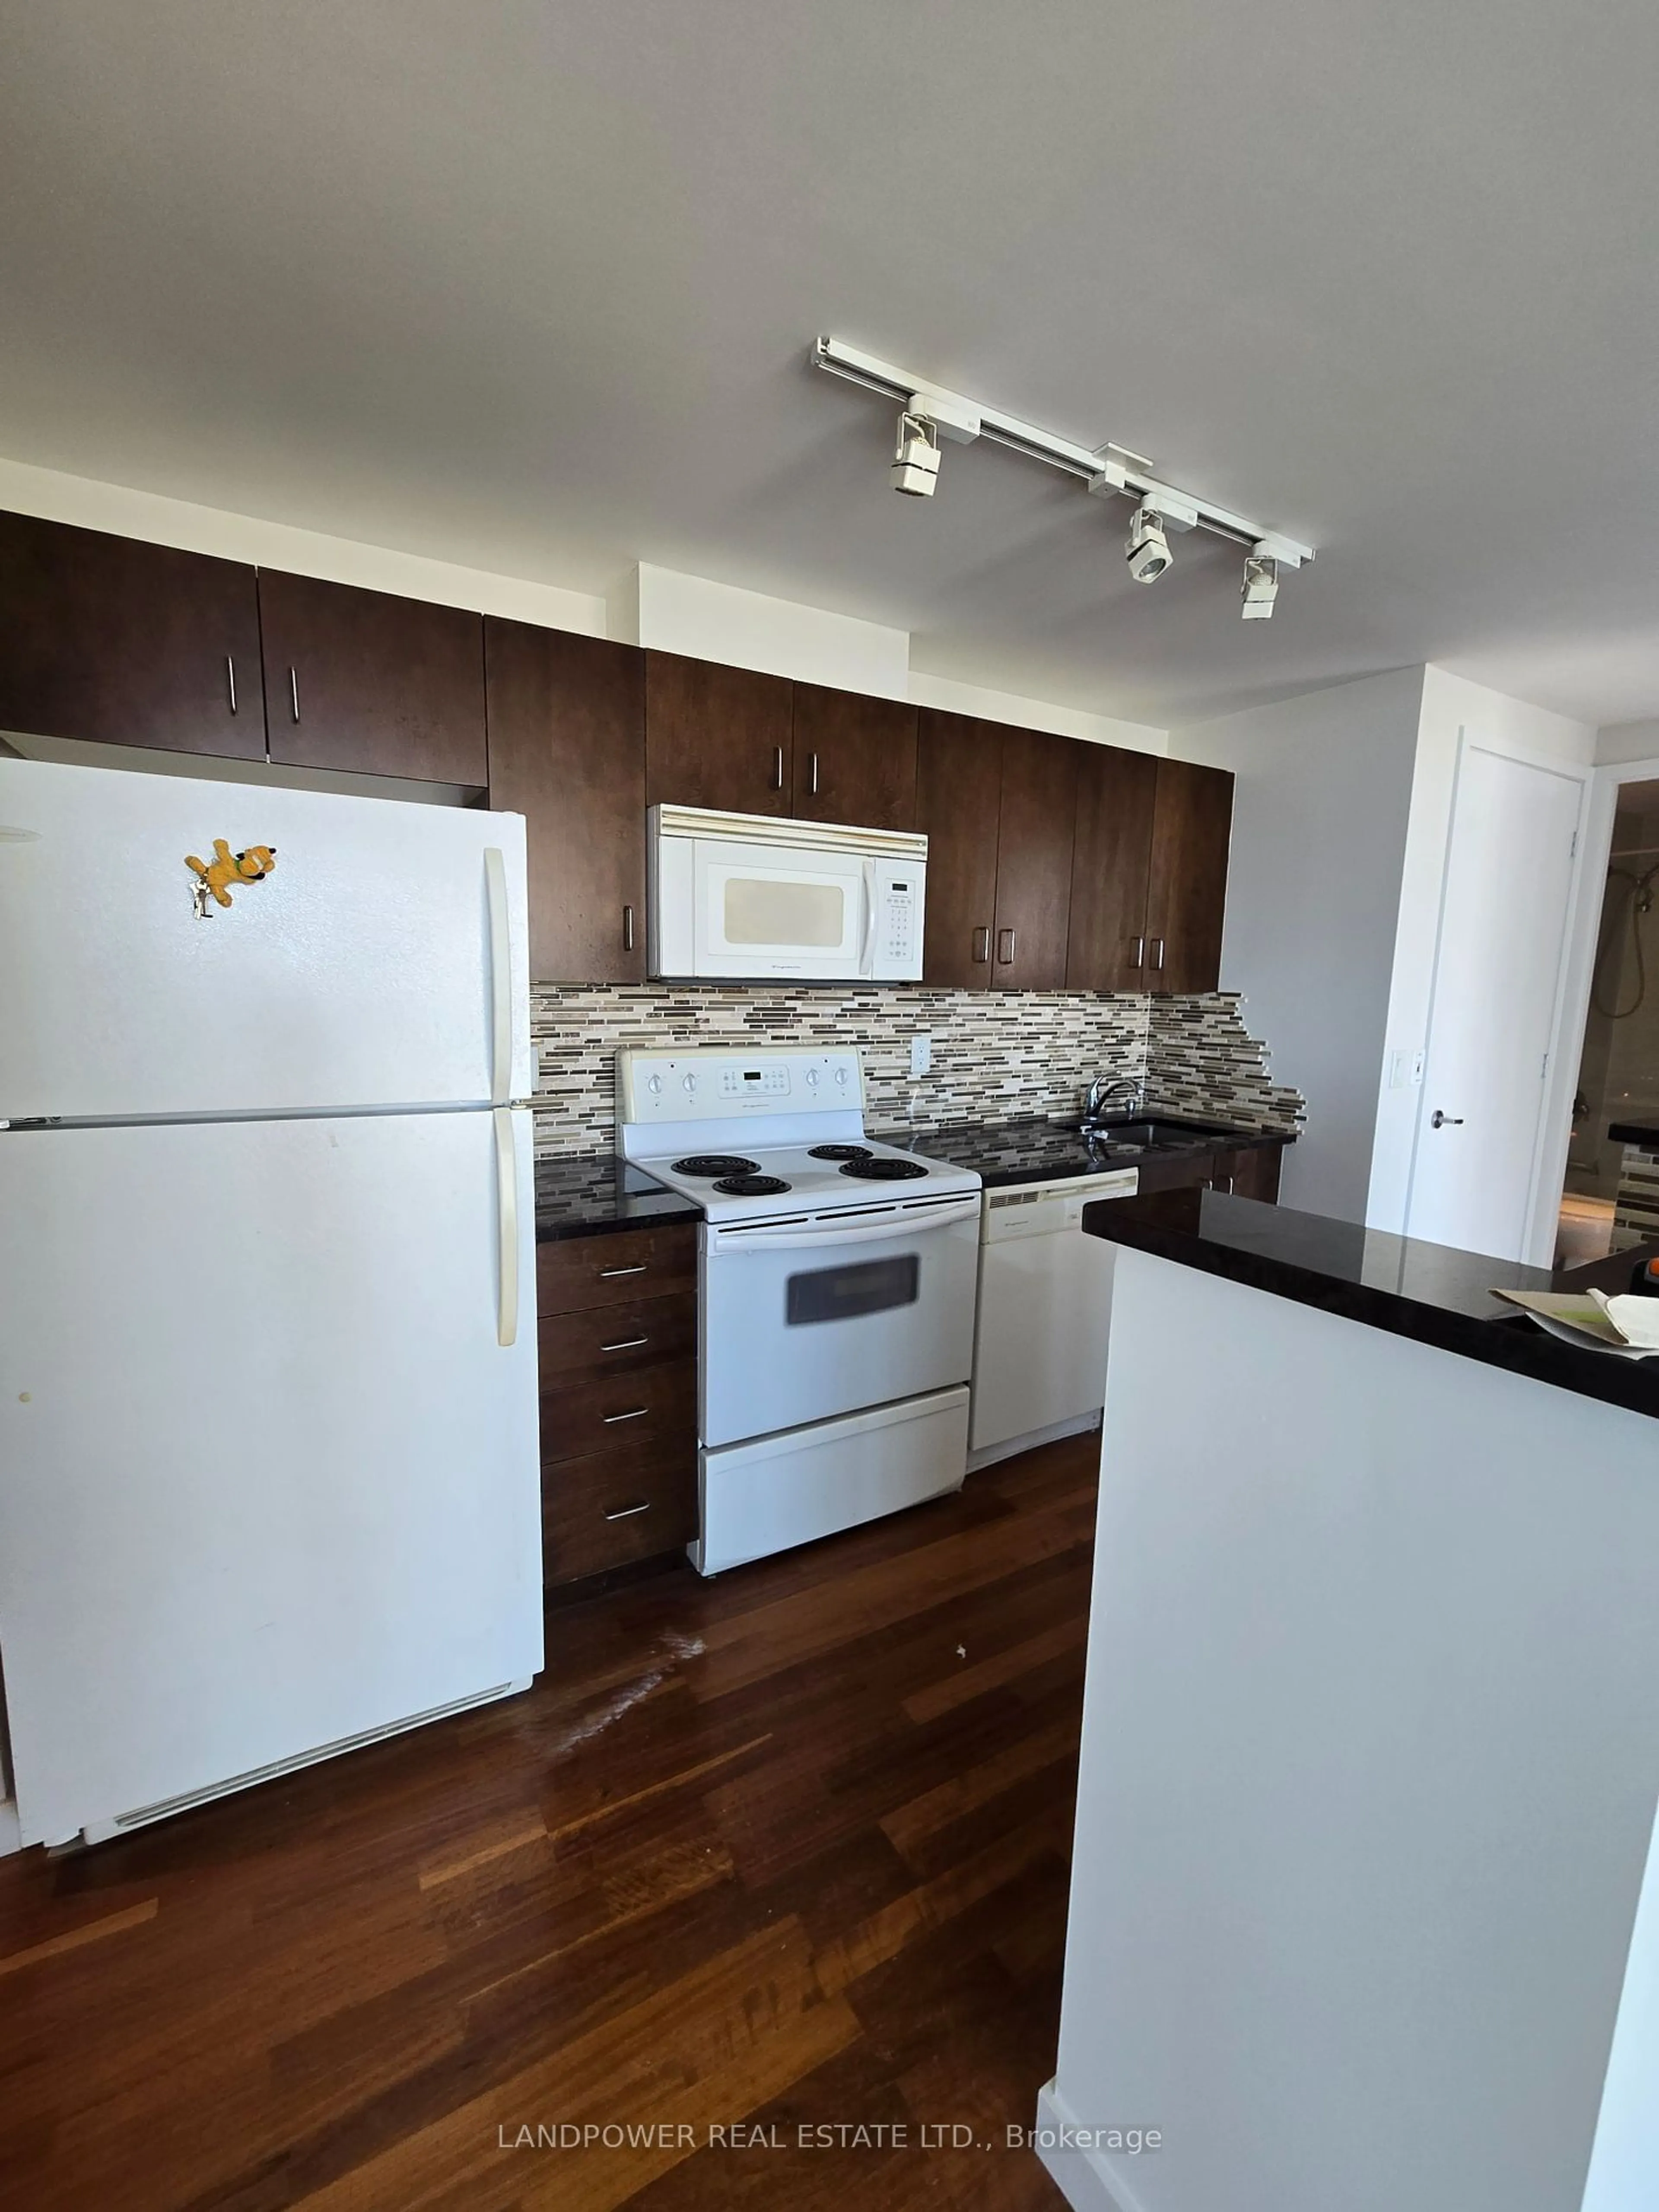 Standard kitchen for 281 Mutual St #1608, Toronto Ontario M4Y 1X6